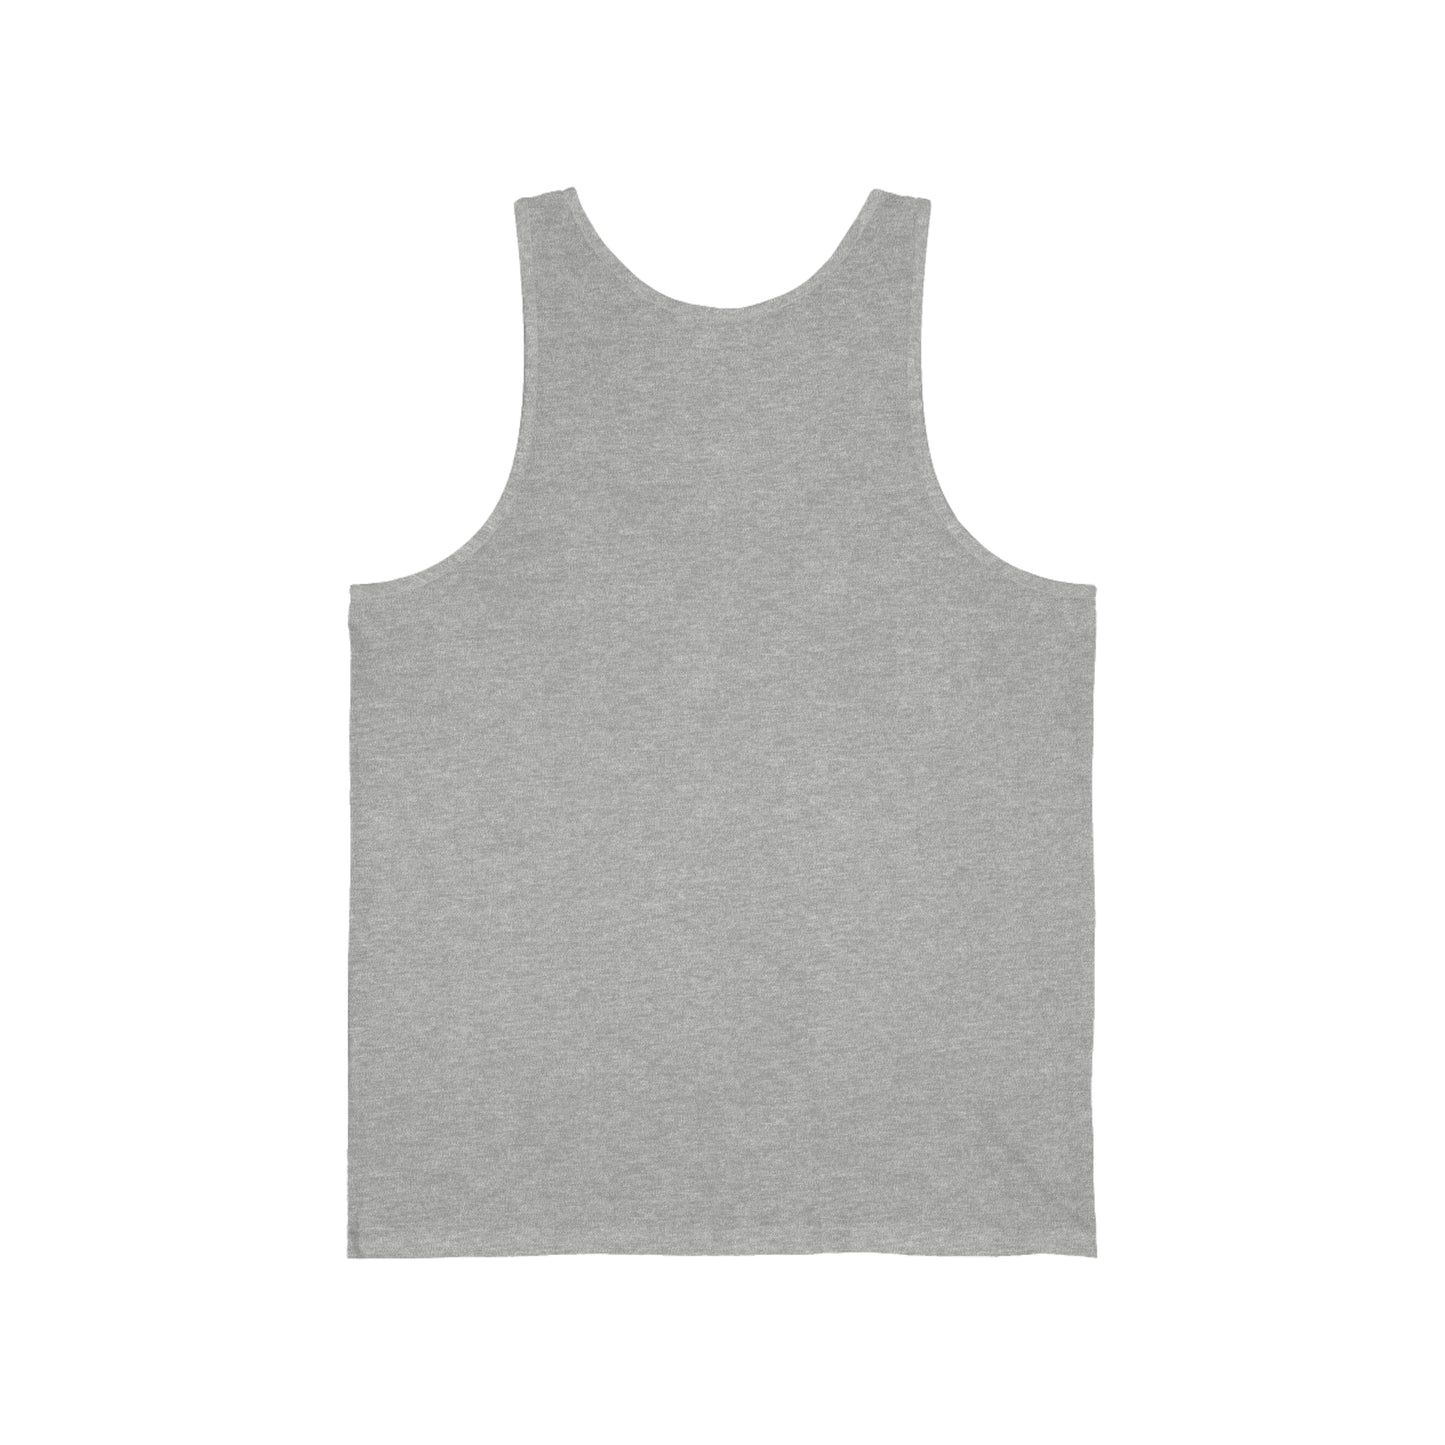 Working on My Booty Workout Shirt, Workout Gym Lift Unisex Tank, muscle tee, gym shirt, muscle tank, crossfit tank, halloween tee